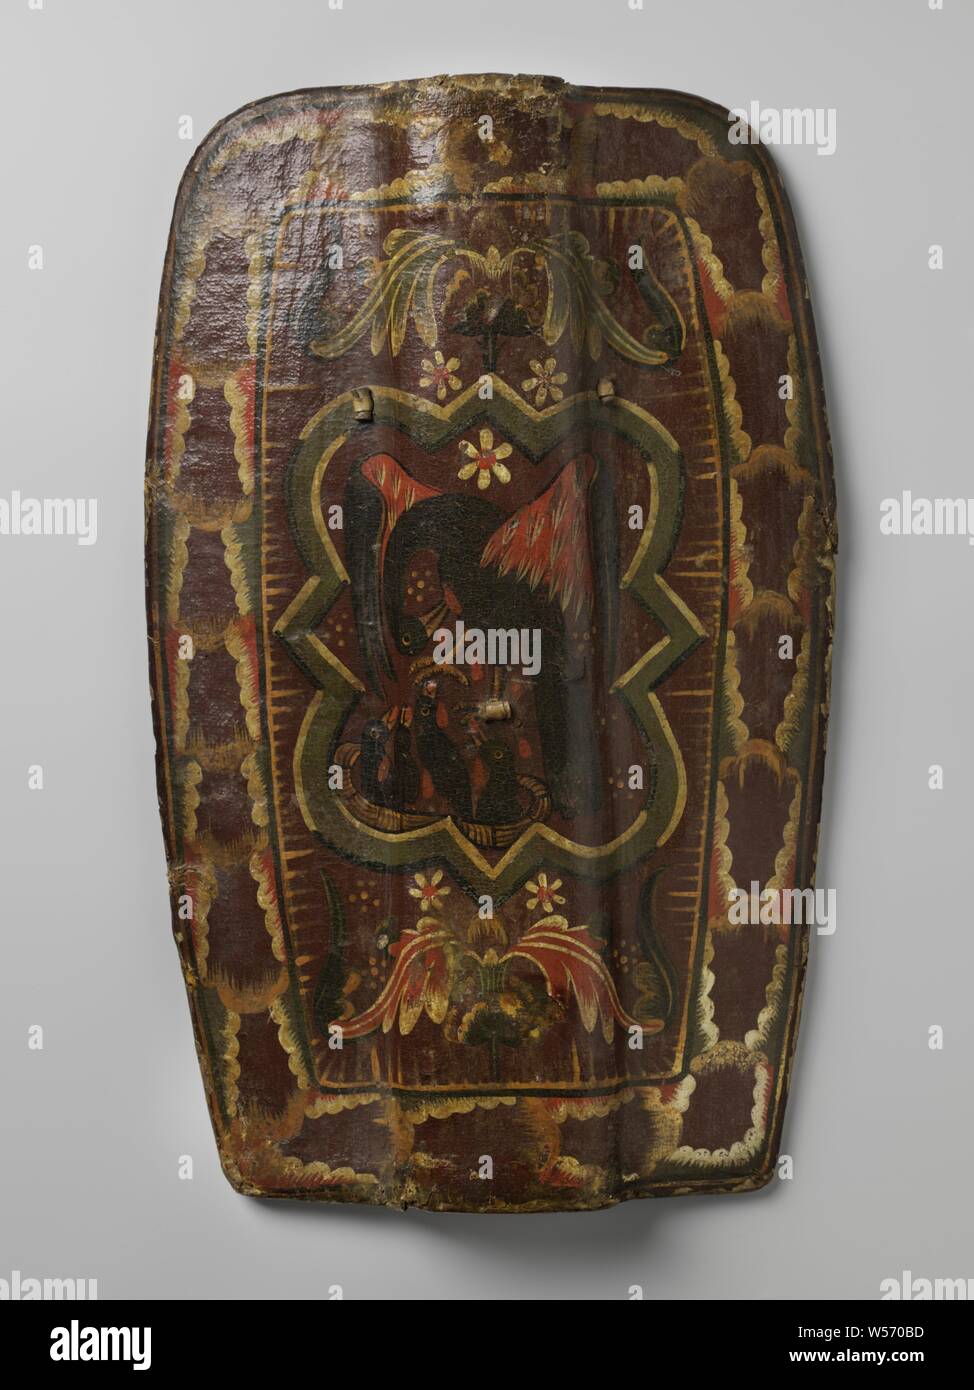 https://c8.alamy.com/comp/W570BD/fifteenth-century-german-shield-painted-with-a-pelican-with-her-boy-elongated-fifteenth-century-german-shield-probably-a-footmans-shield-with-concave-sides-an-increase-of-13-cm-wide-runs-in-the-middle-from-top-to-bottom-completely-covered-with-dark-red-leather-the-front-painted-with-the-representation-of-a-black-pelican-poking-itself-in-the-chest-with-its-beak-above-a-nest-with-four-young-ones-feeding-on-the-falling-drops-of-blood-in-a-four-lobed-frame-surrounded-by-plant-flower-and-abstract-motifs-holes-in-the-shield-at-three-places-through-which-straps-come-off-the-handle-held-W570BD.jpg